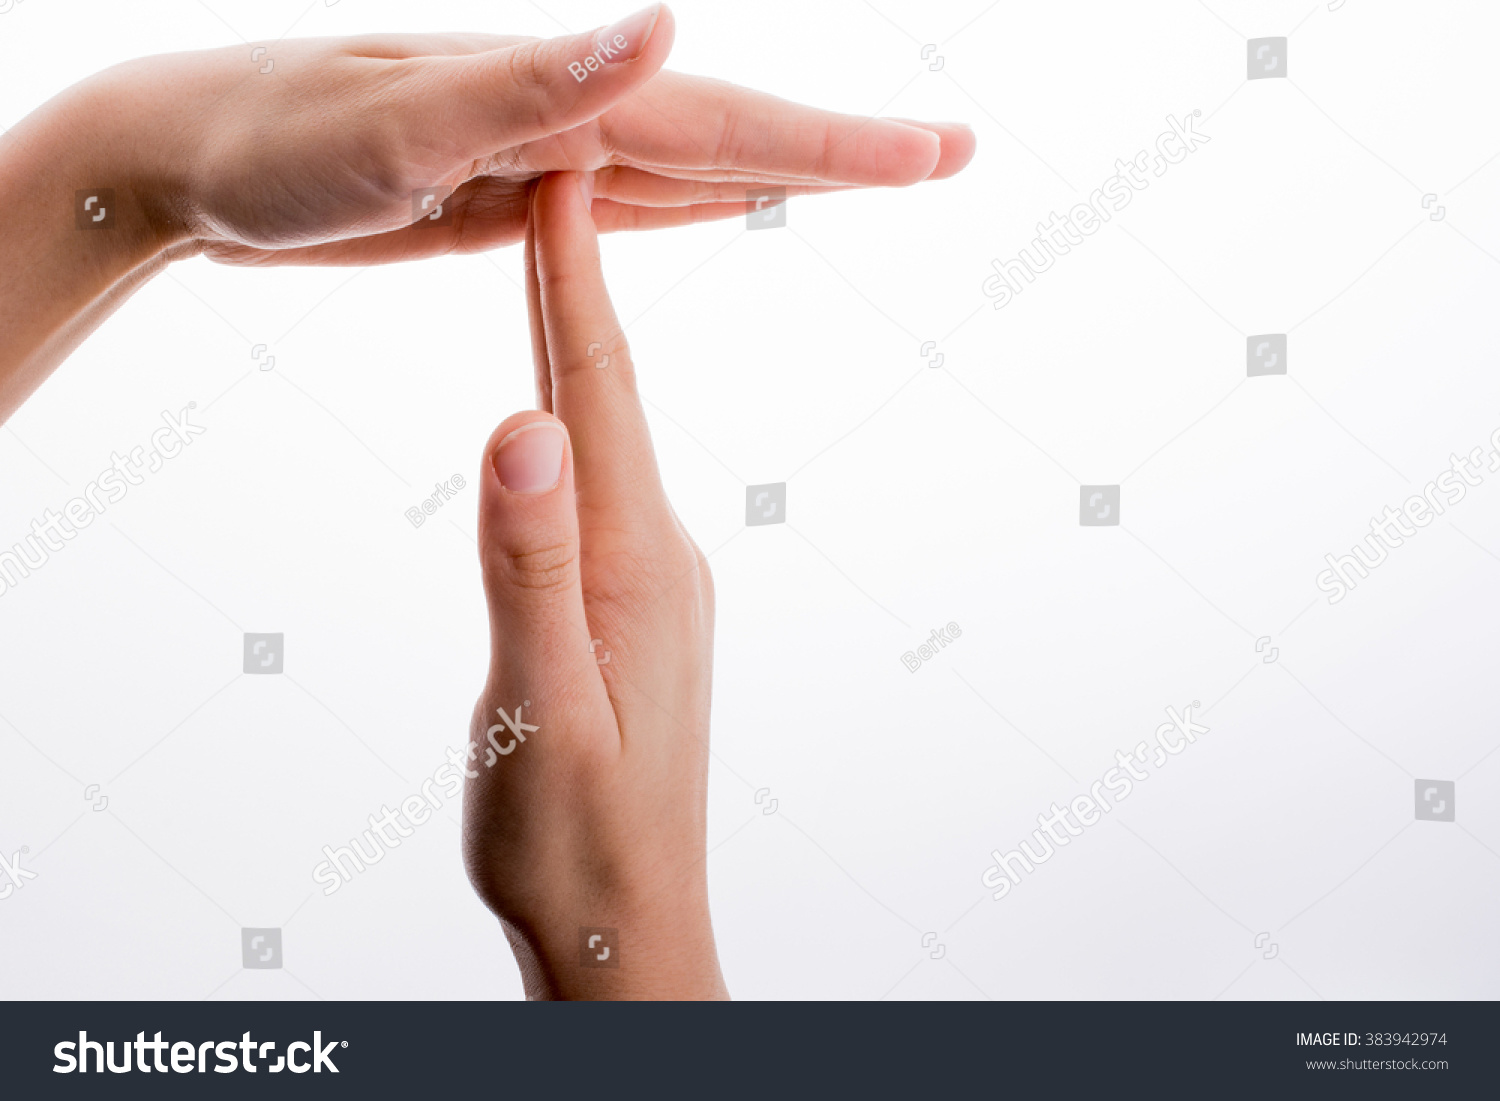 Break time hand gesture on a white background #383942974